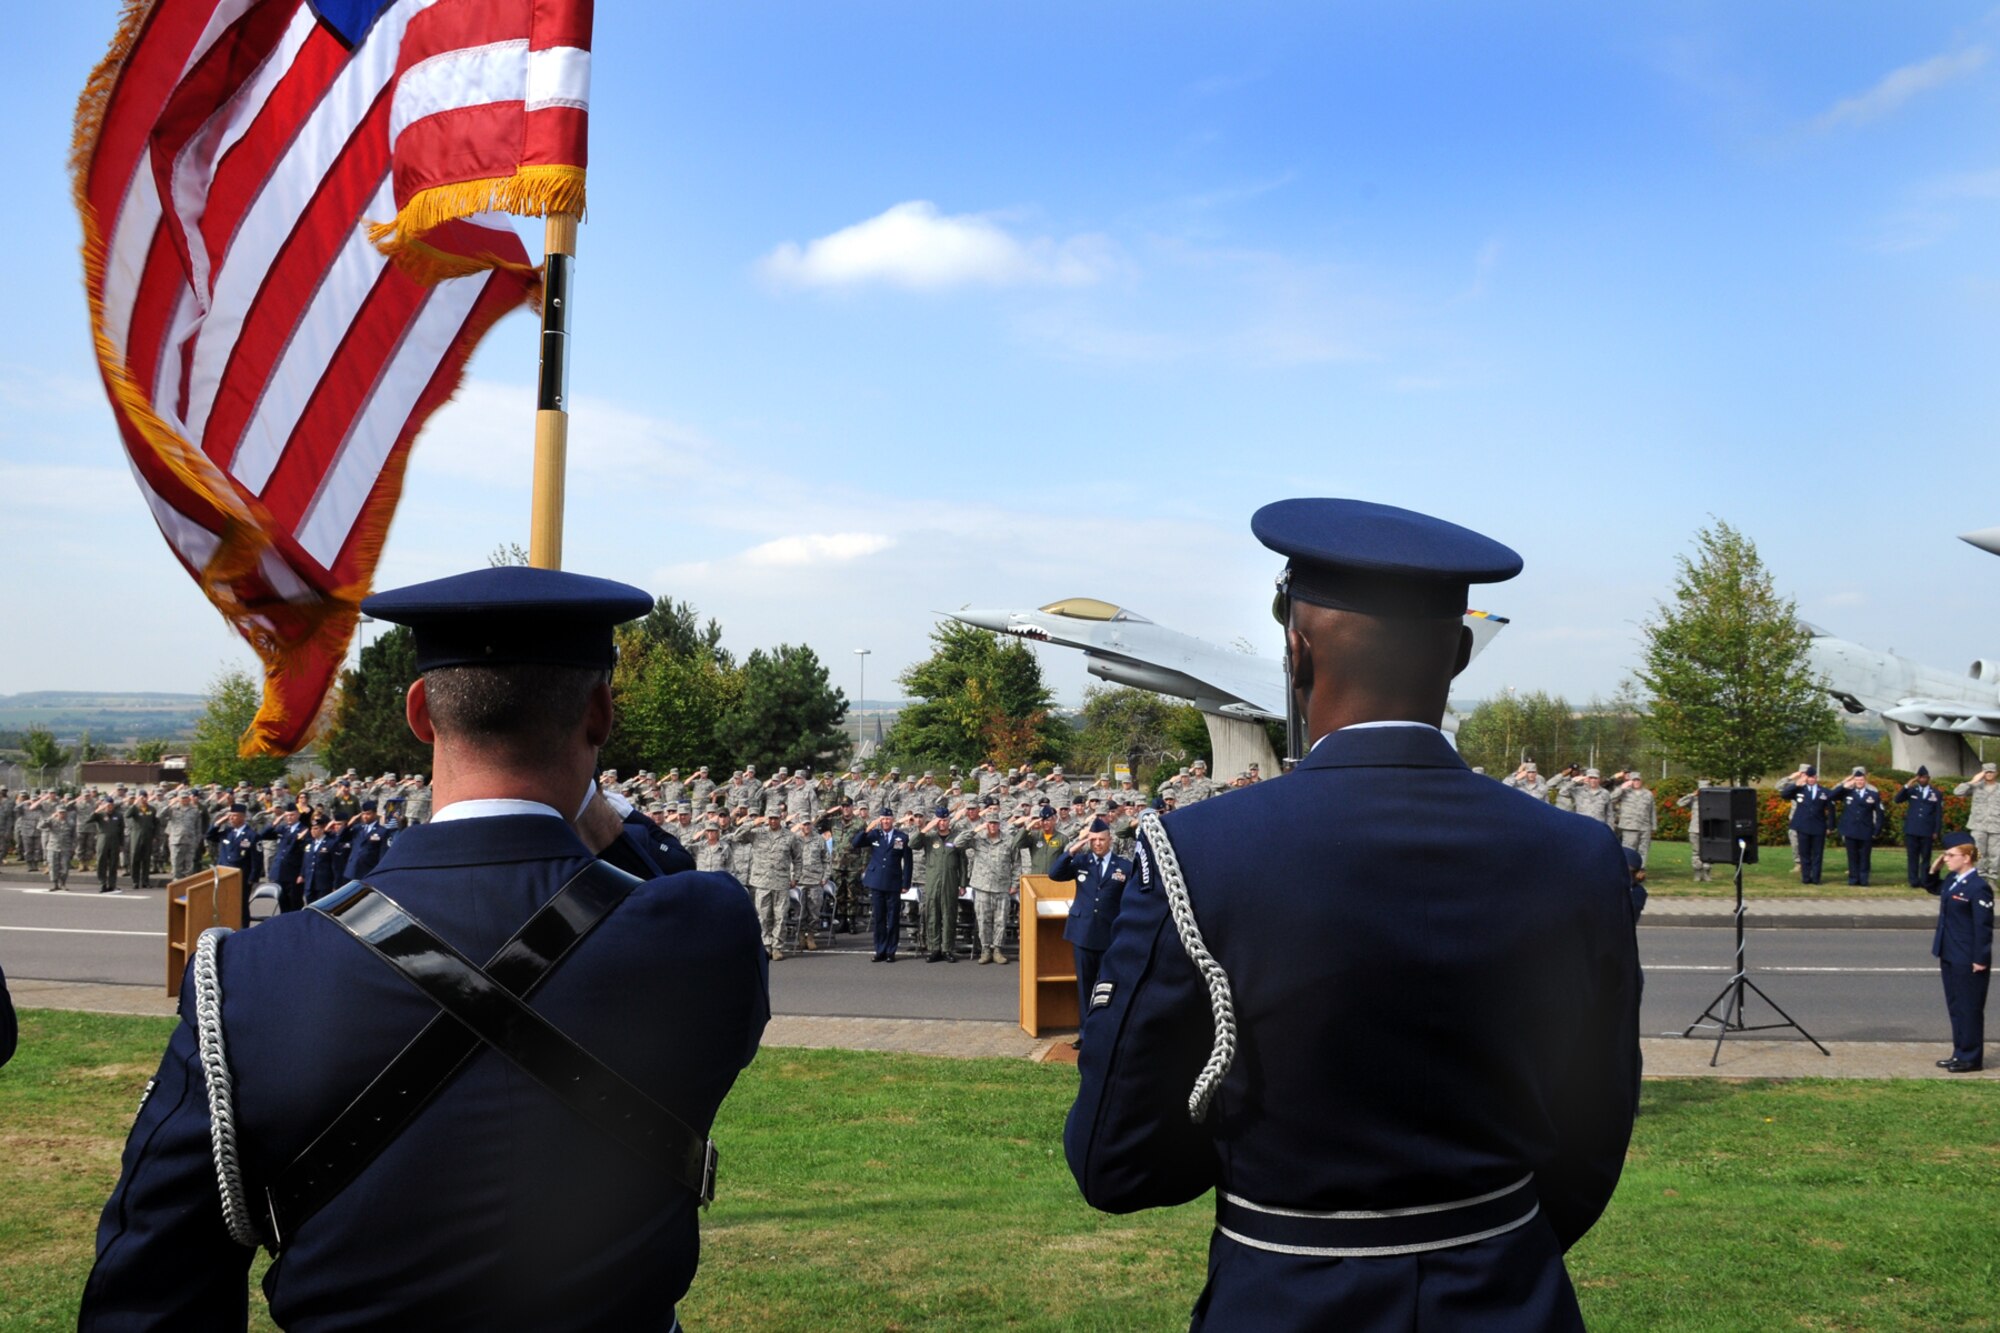 SPANGDAHLEM AIR BASE, Germany -- Members of the 52nd Fighter Wing Honor Guard post the colors as members of the 52nd FW salute during the POW/MIA ceremony at the Air Park Sept. 18. The ceremony is held every year to remember those who have served and been taken prisoners of war or have been listed as missing in action. (U.S. Air Force photo/Airman 1st Class Nathanael Callon)